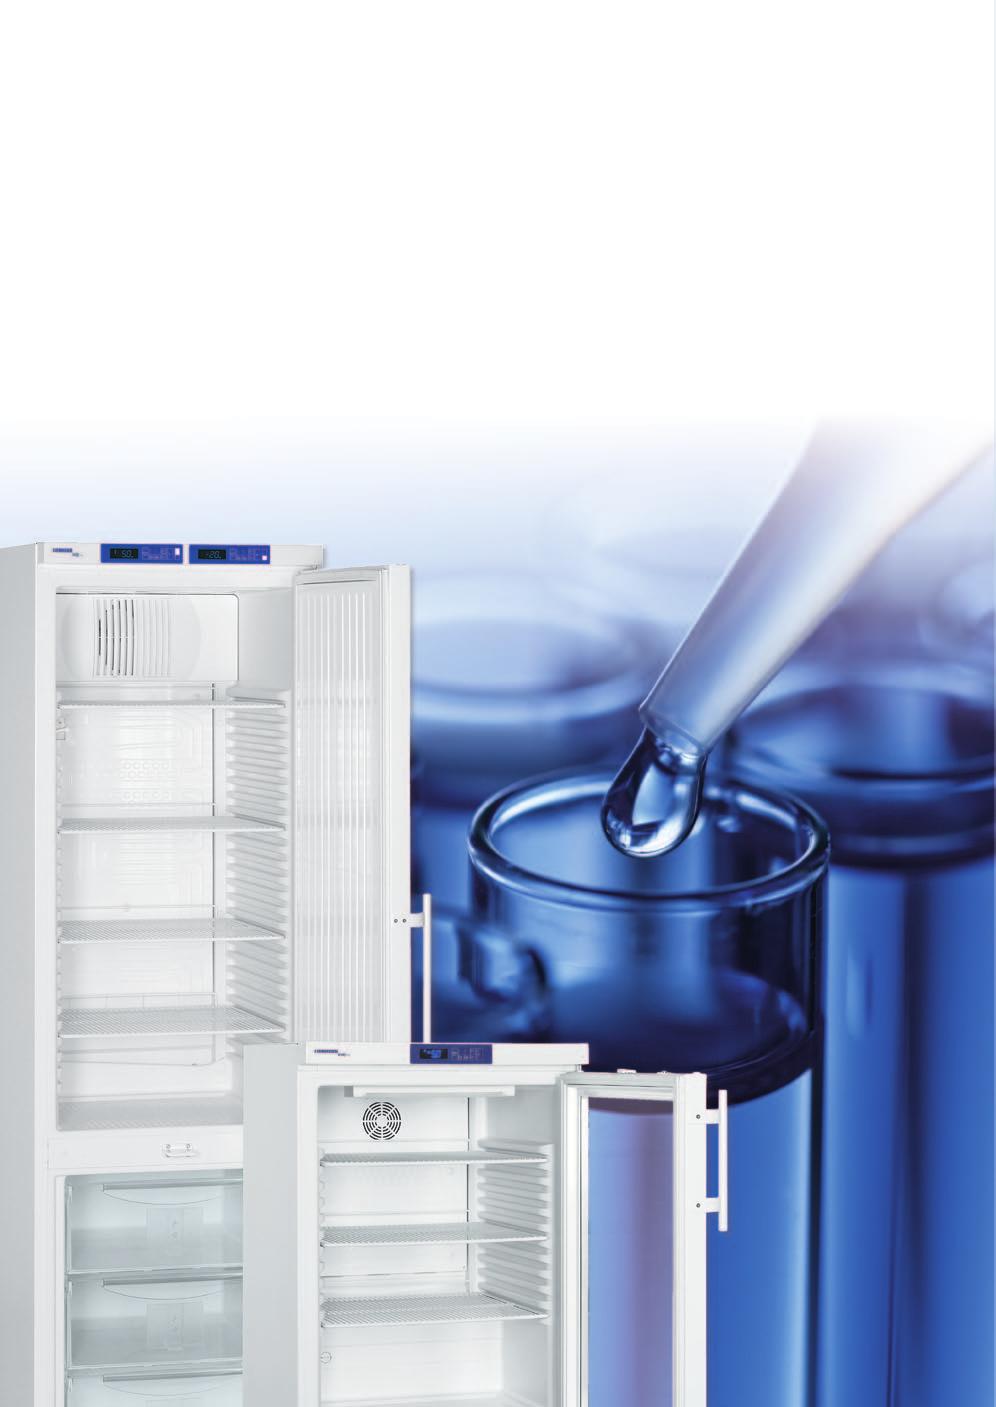 Laboratory refrigerators and laboratory fridge-freezer with Comfort Laboratory appliances in compact format The Comfort The precision Comfort with digital temperature display enables temperatures to